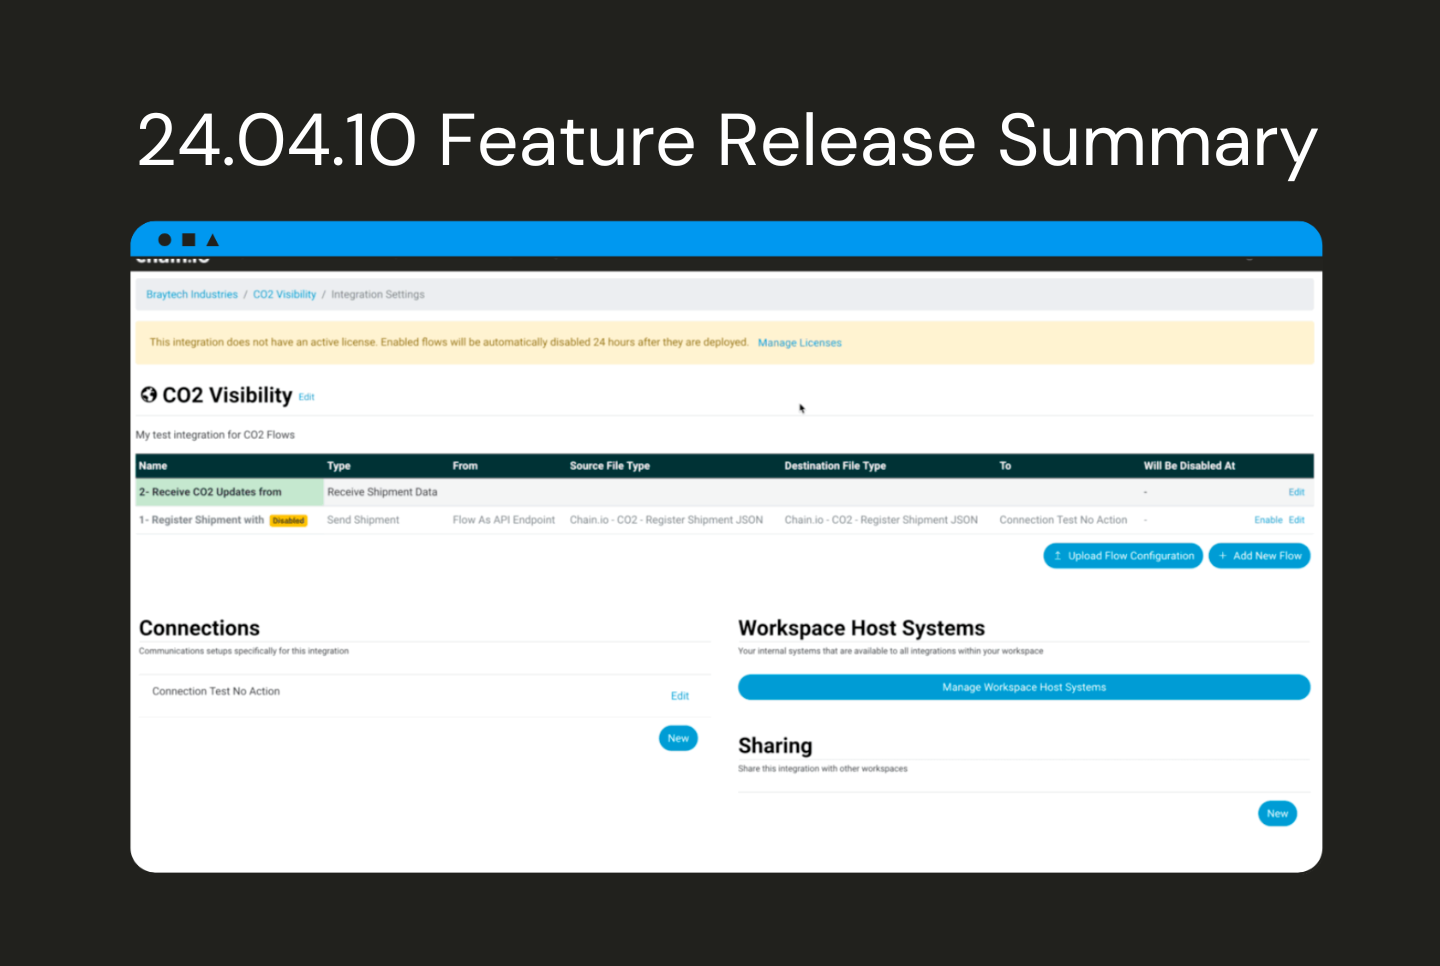 24.04.10 Feature Release Summary